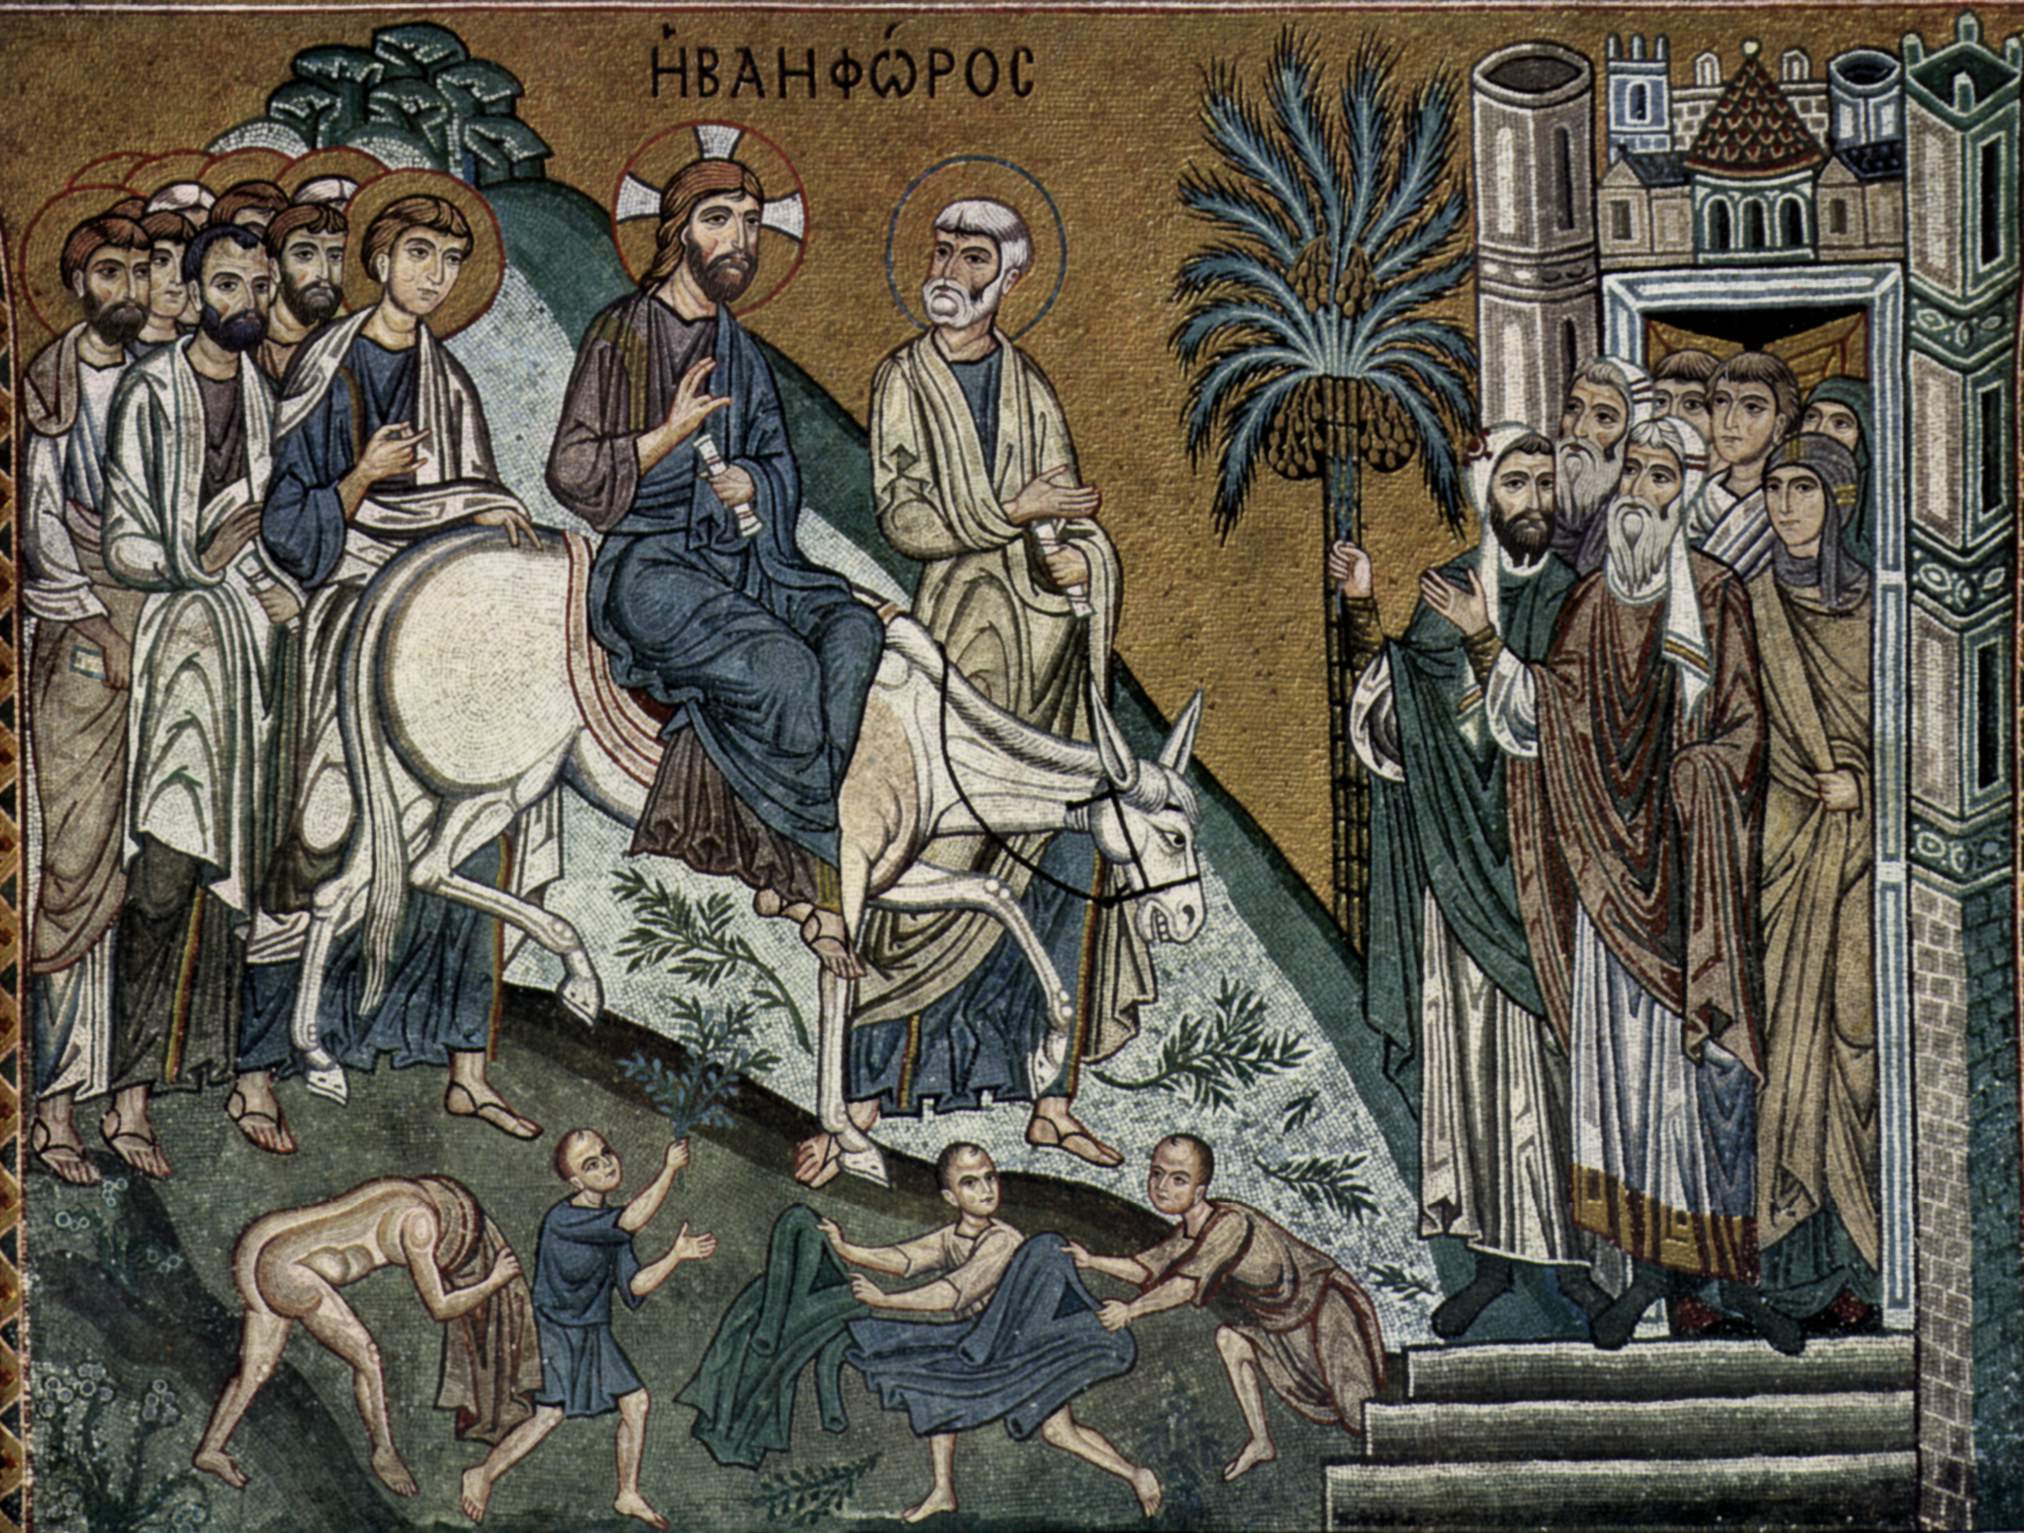 Entry Into Jerusalem The Palm Sunday Icon A Reader S Guide To Orthodox Icons